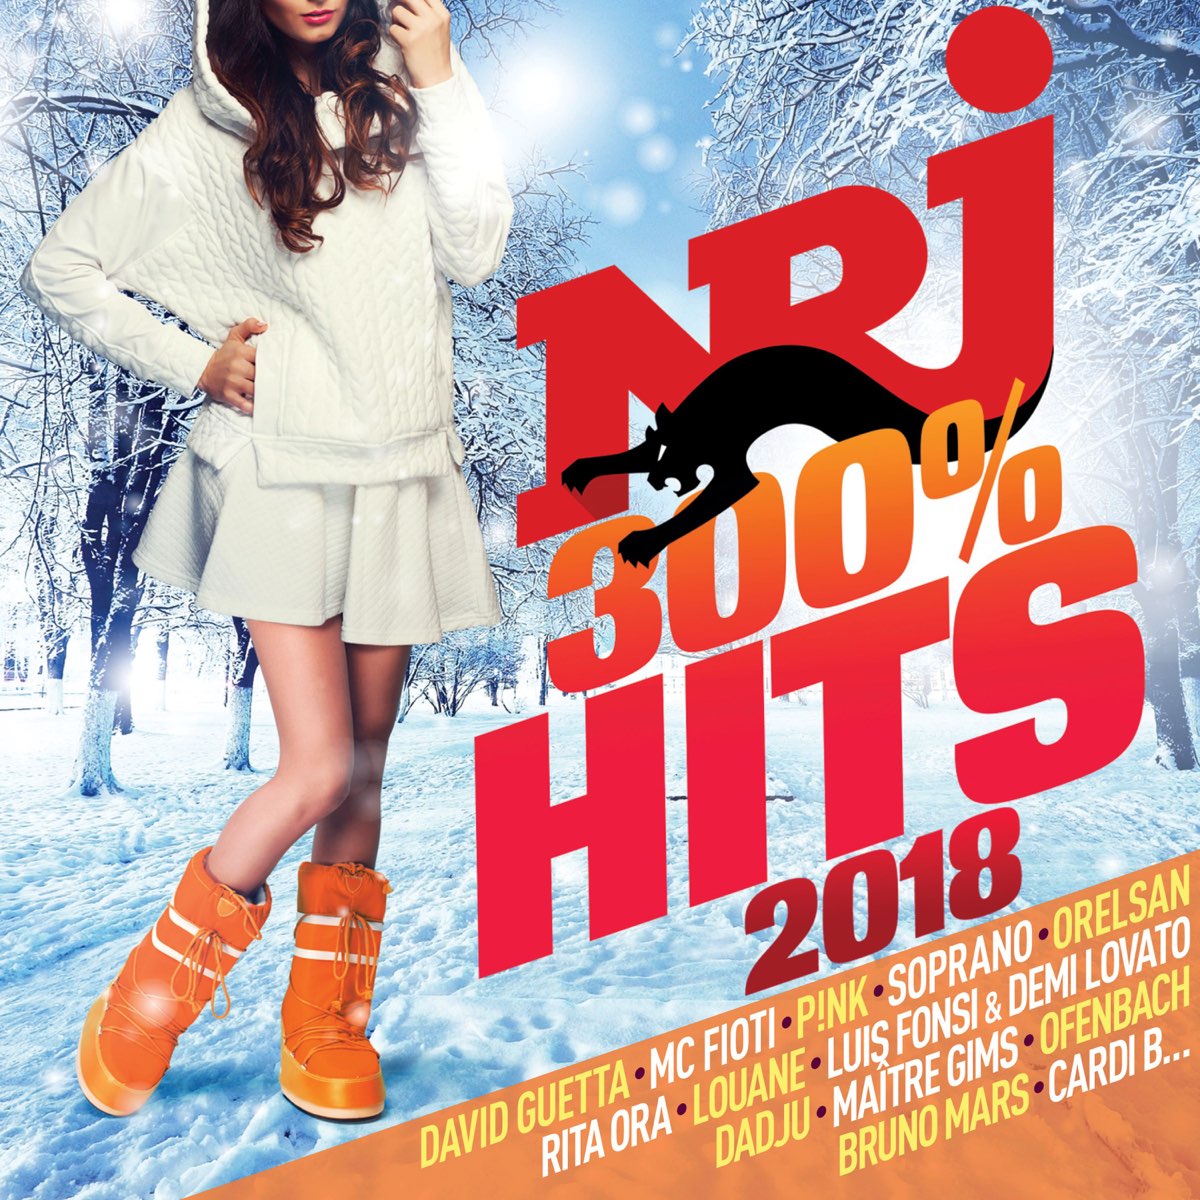 NRJ 300% Hits 2018 by Various Artists on iTunes